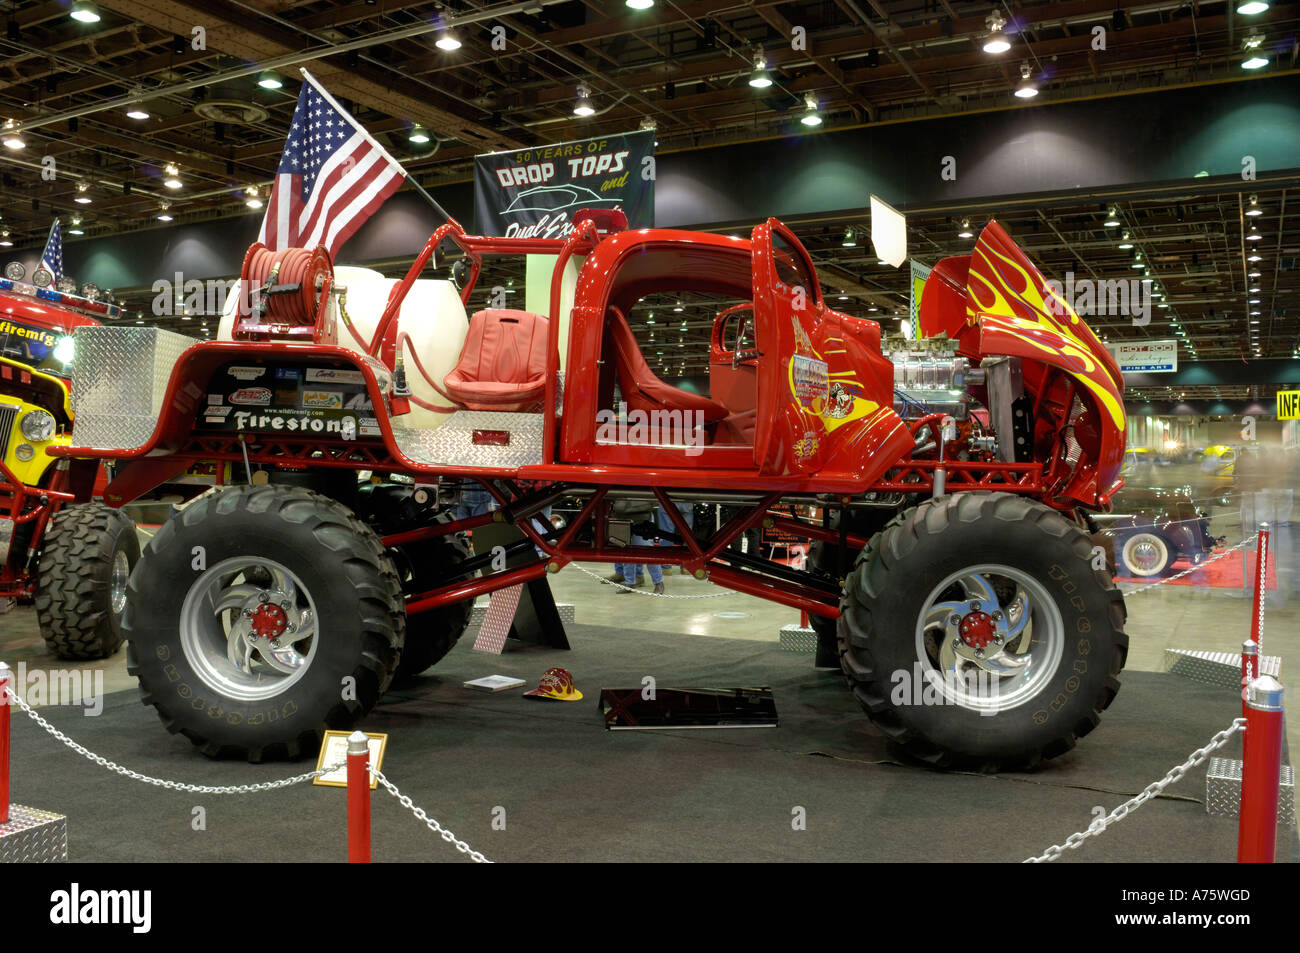 1937 Ford fire truck monster truck at the 2006 Detroit Autorama Stock Photo